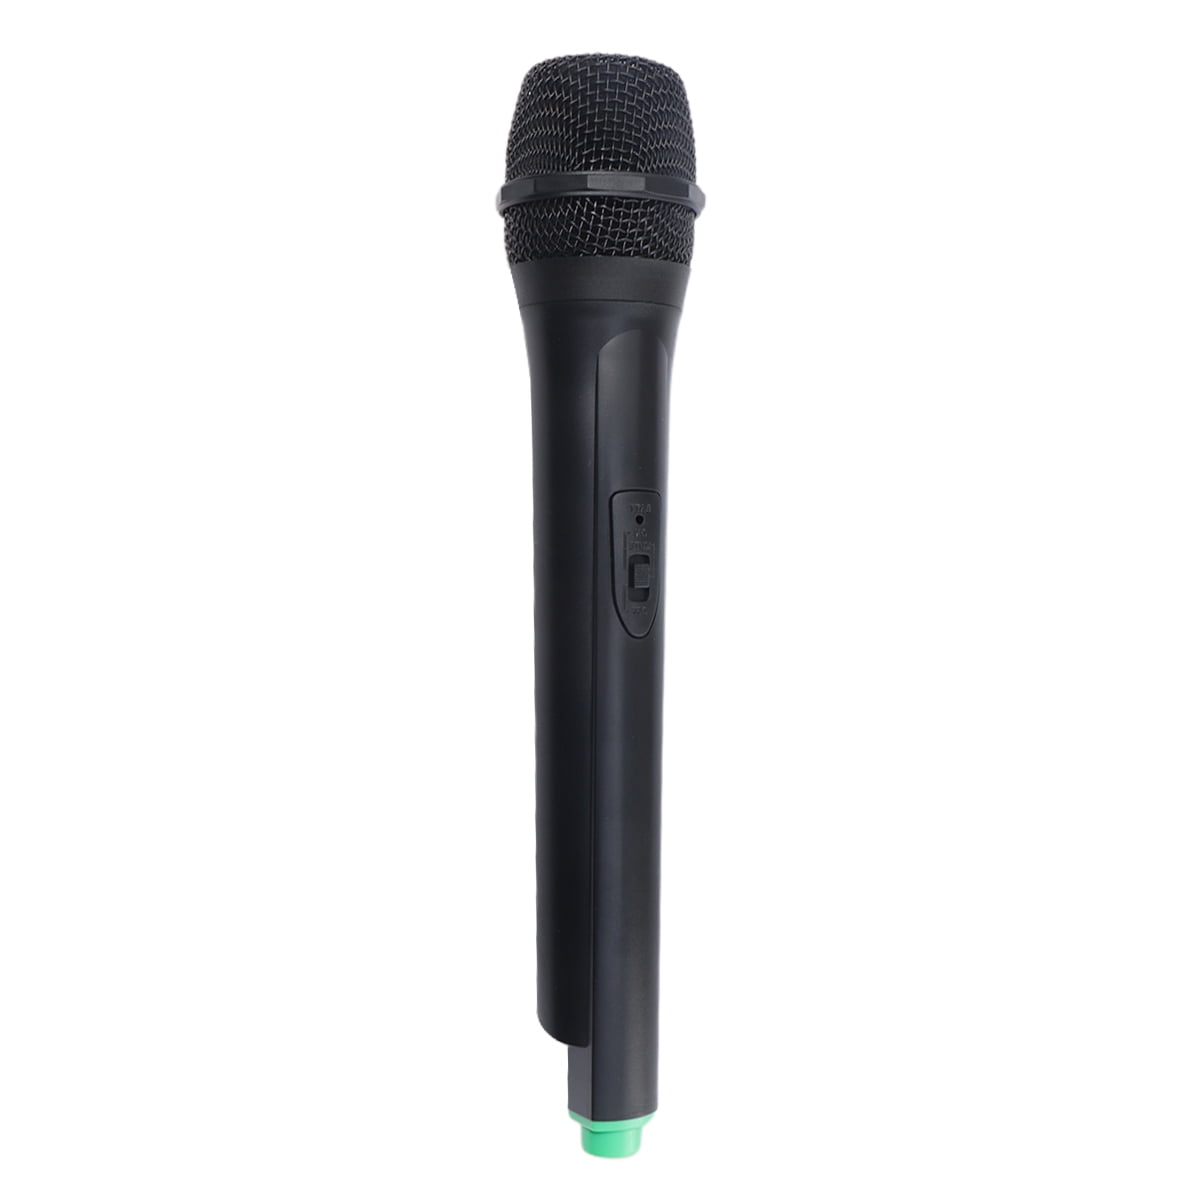 Classic Microphone Props Fake Mic Toy Handheld